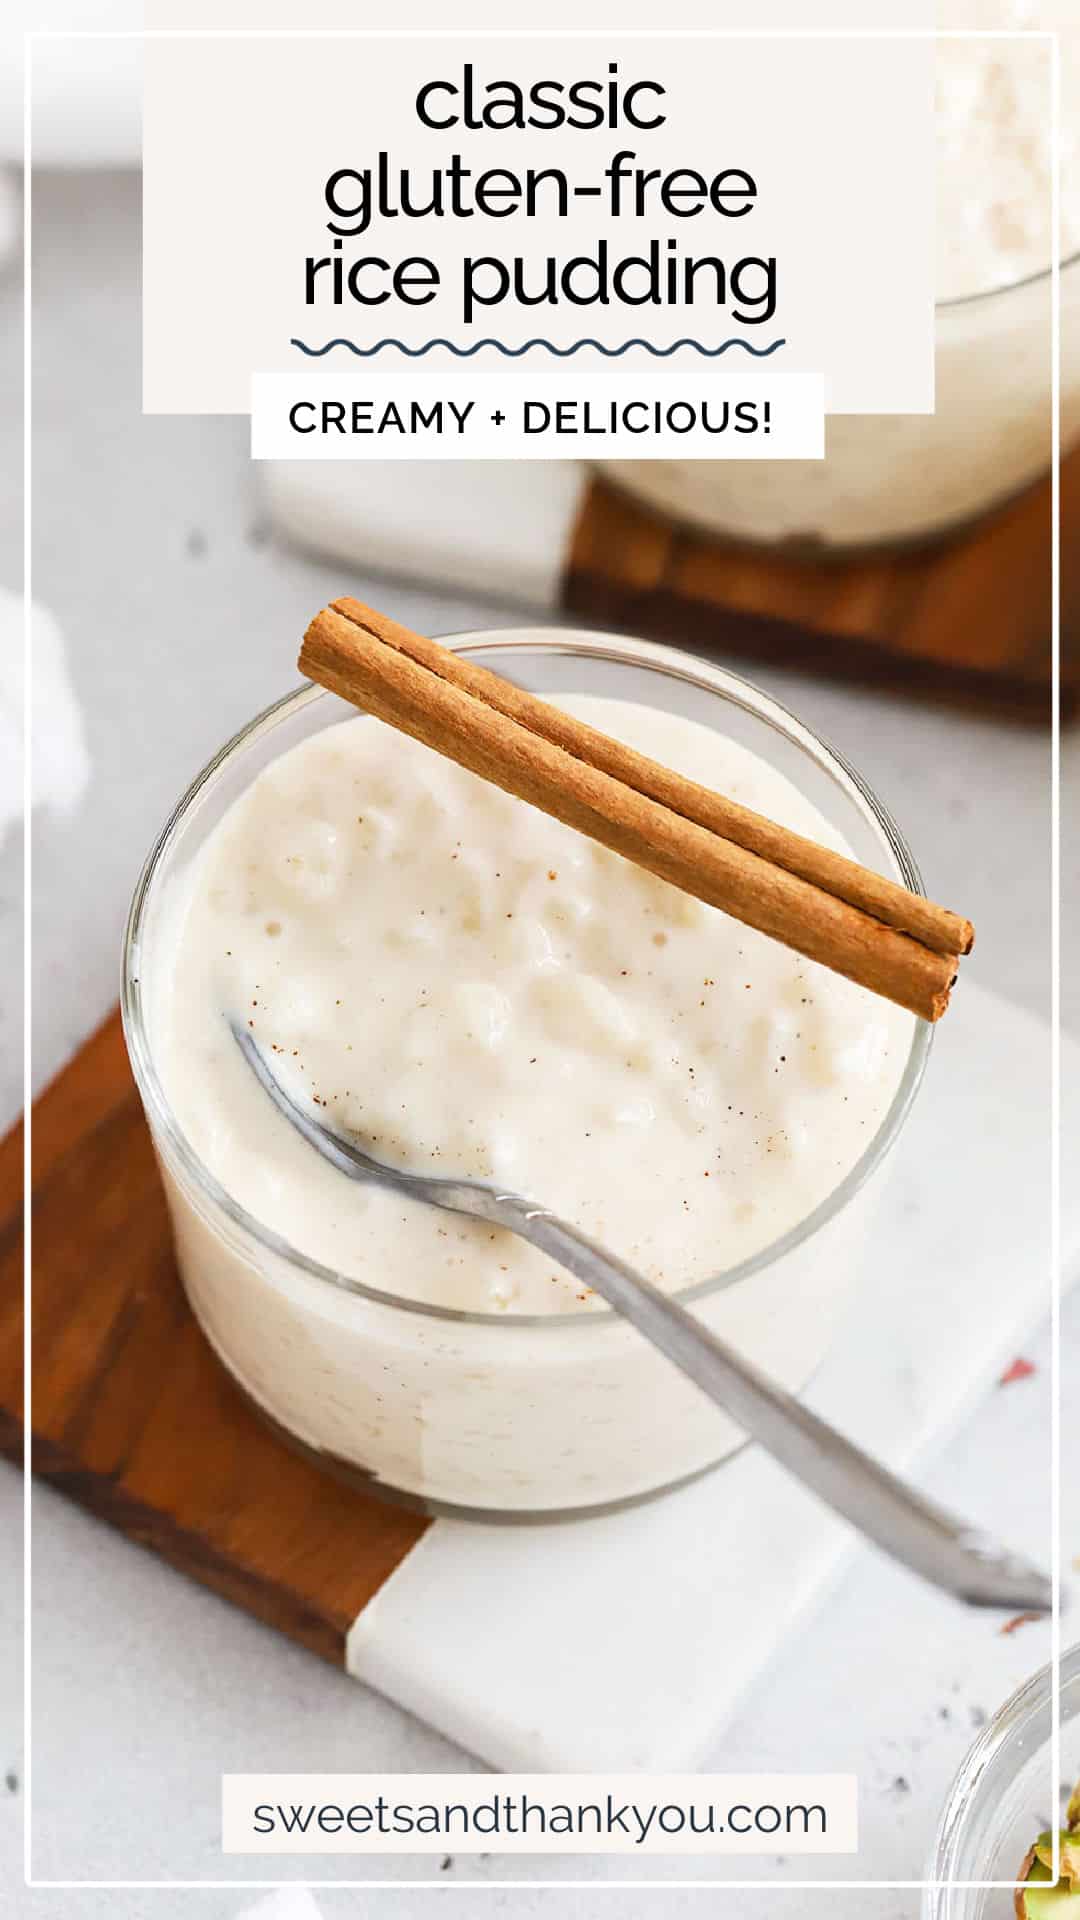 Our gluten-free rice pudding recipe has all the classic flavor and creamy texture you crave. If you're craving old fashioned rice pudding, this creamy rice pudding is here to deliver. Made from simple ingredients, this traditional dessert recipe is easy to make and easy on your budget! It's the perfect beginner dessert recipe. 